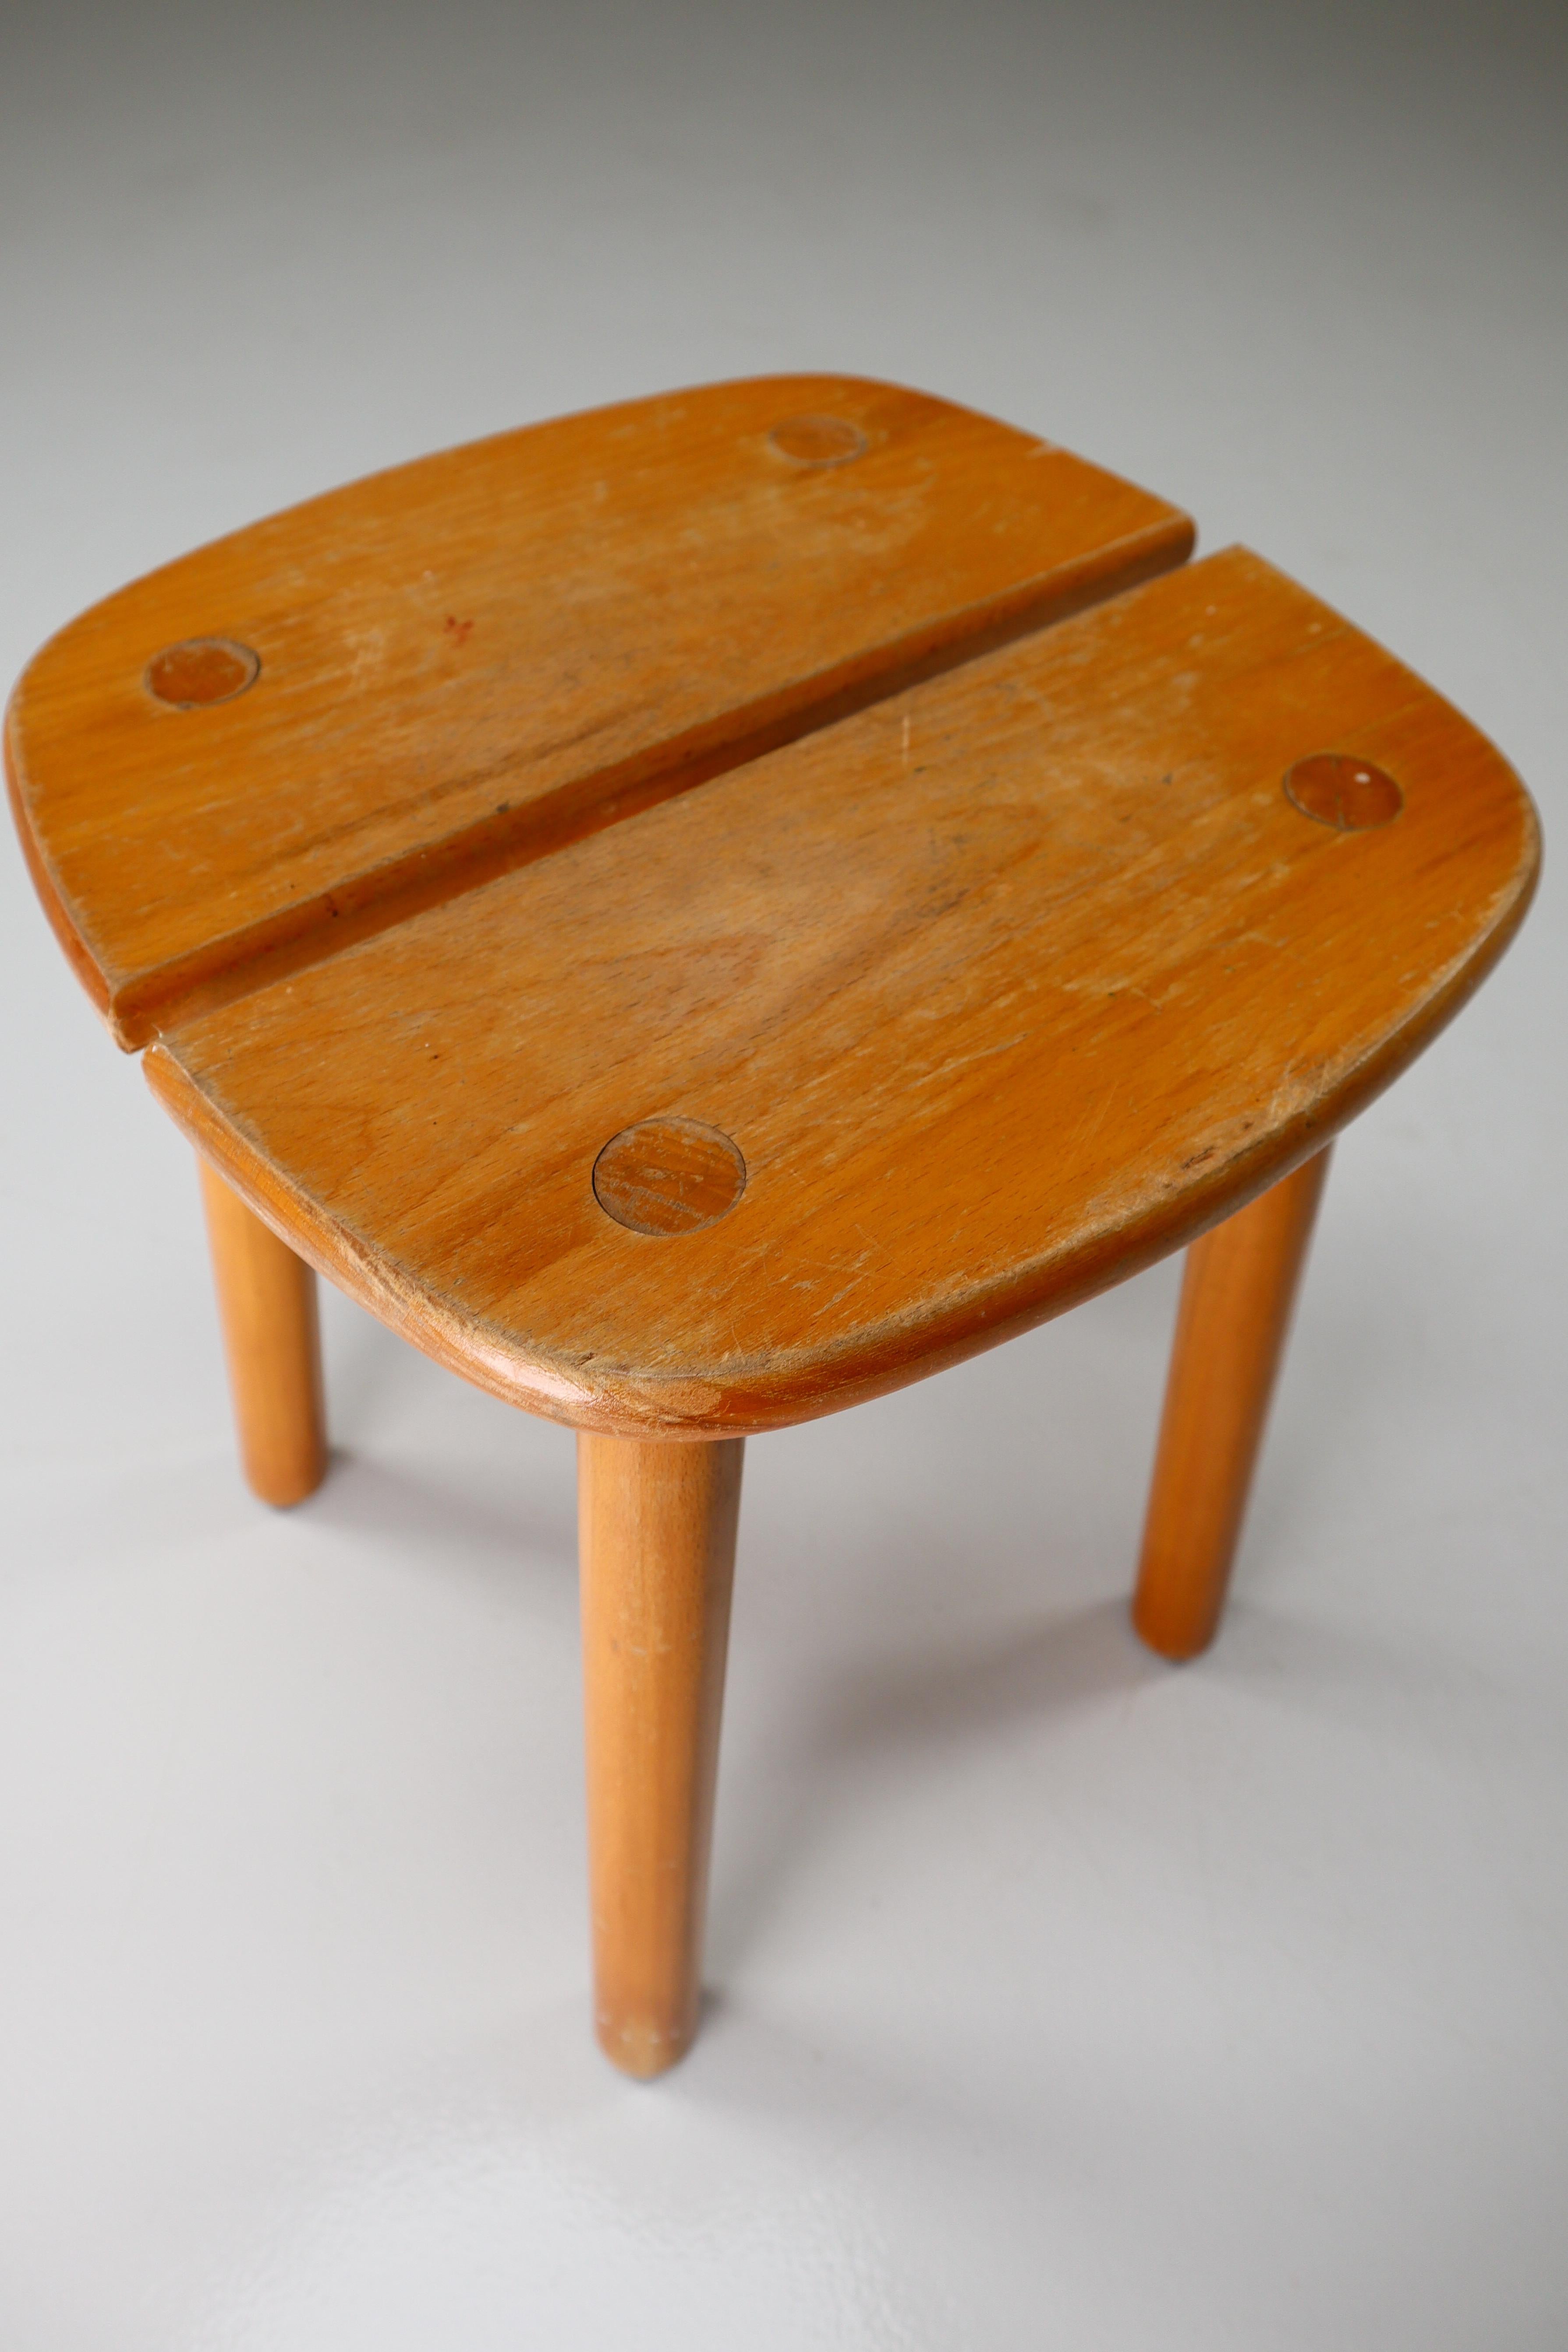 Pair of two stools 'Coffee bean' drawn by Pierre Gautier-Delaye in the 1960s for the Vergneres Editor. Made of pine, it is composed of 4 cylindrical feet and a base in the form of a coffee bean. The assembly is assembled according to the